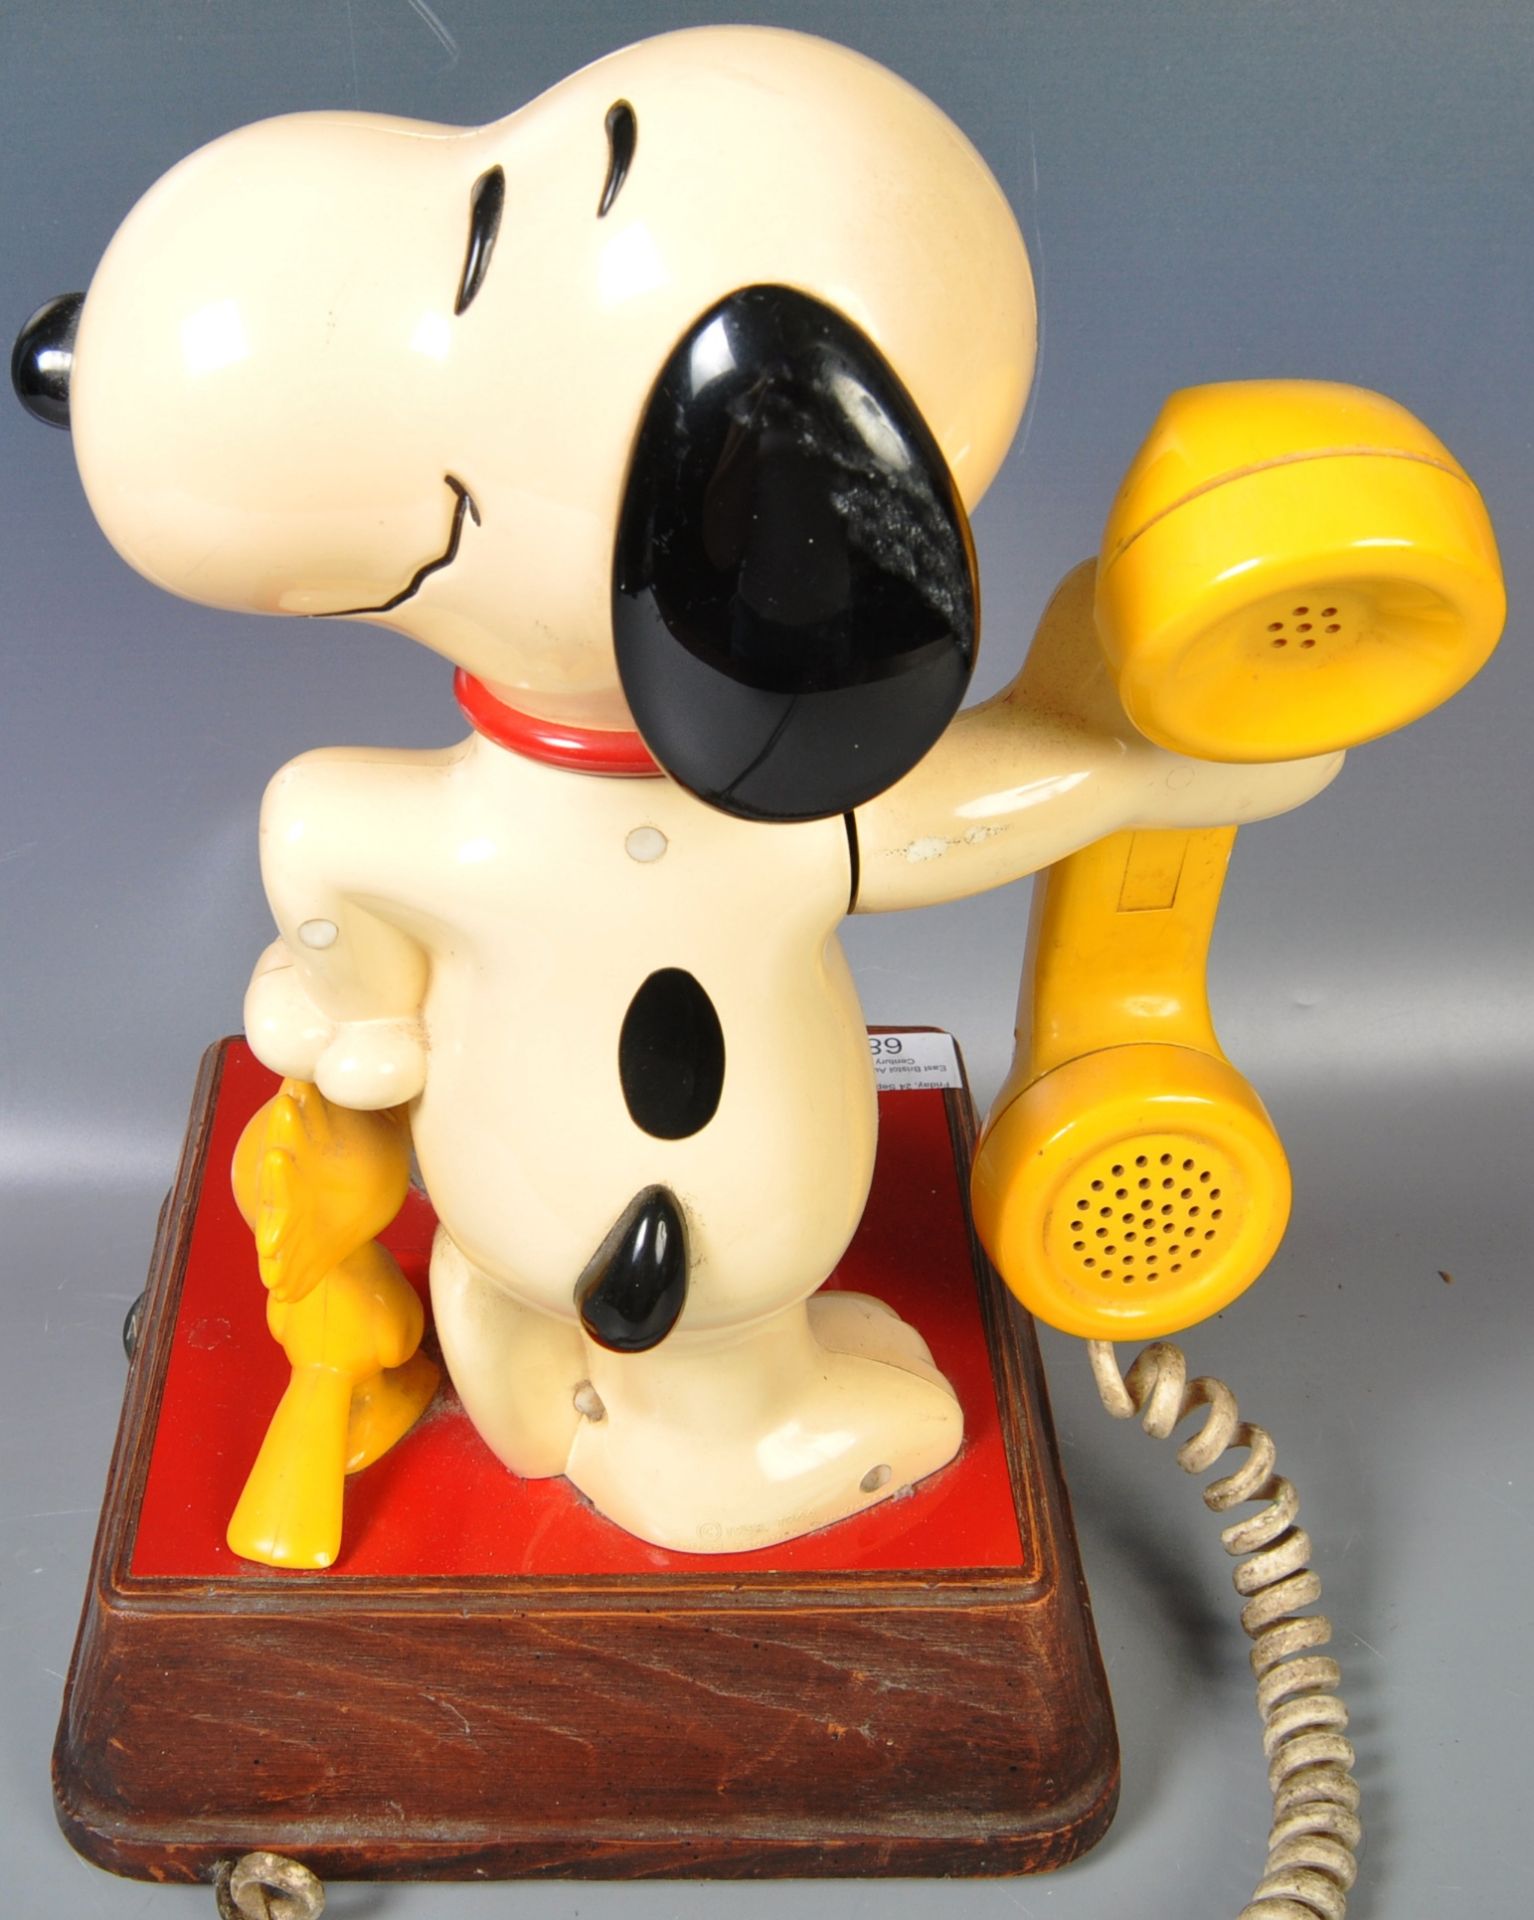 RETRO 1970'S NOVELTY SNOOPY DIAL TELEPHONE - Image 6 of 7